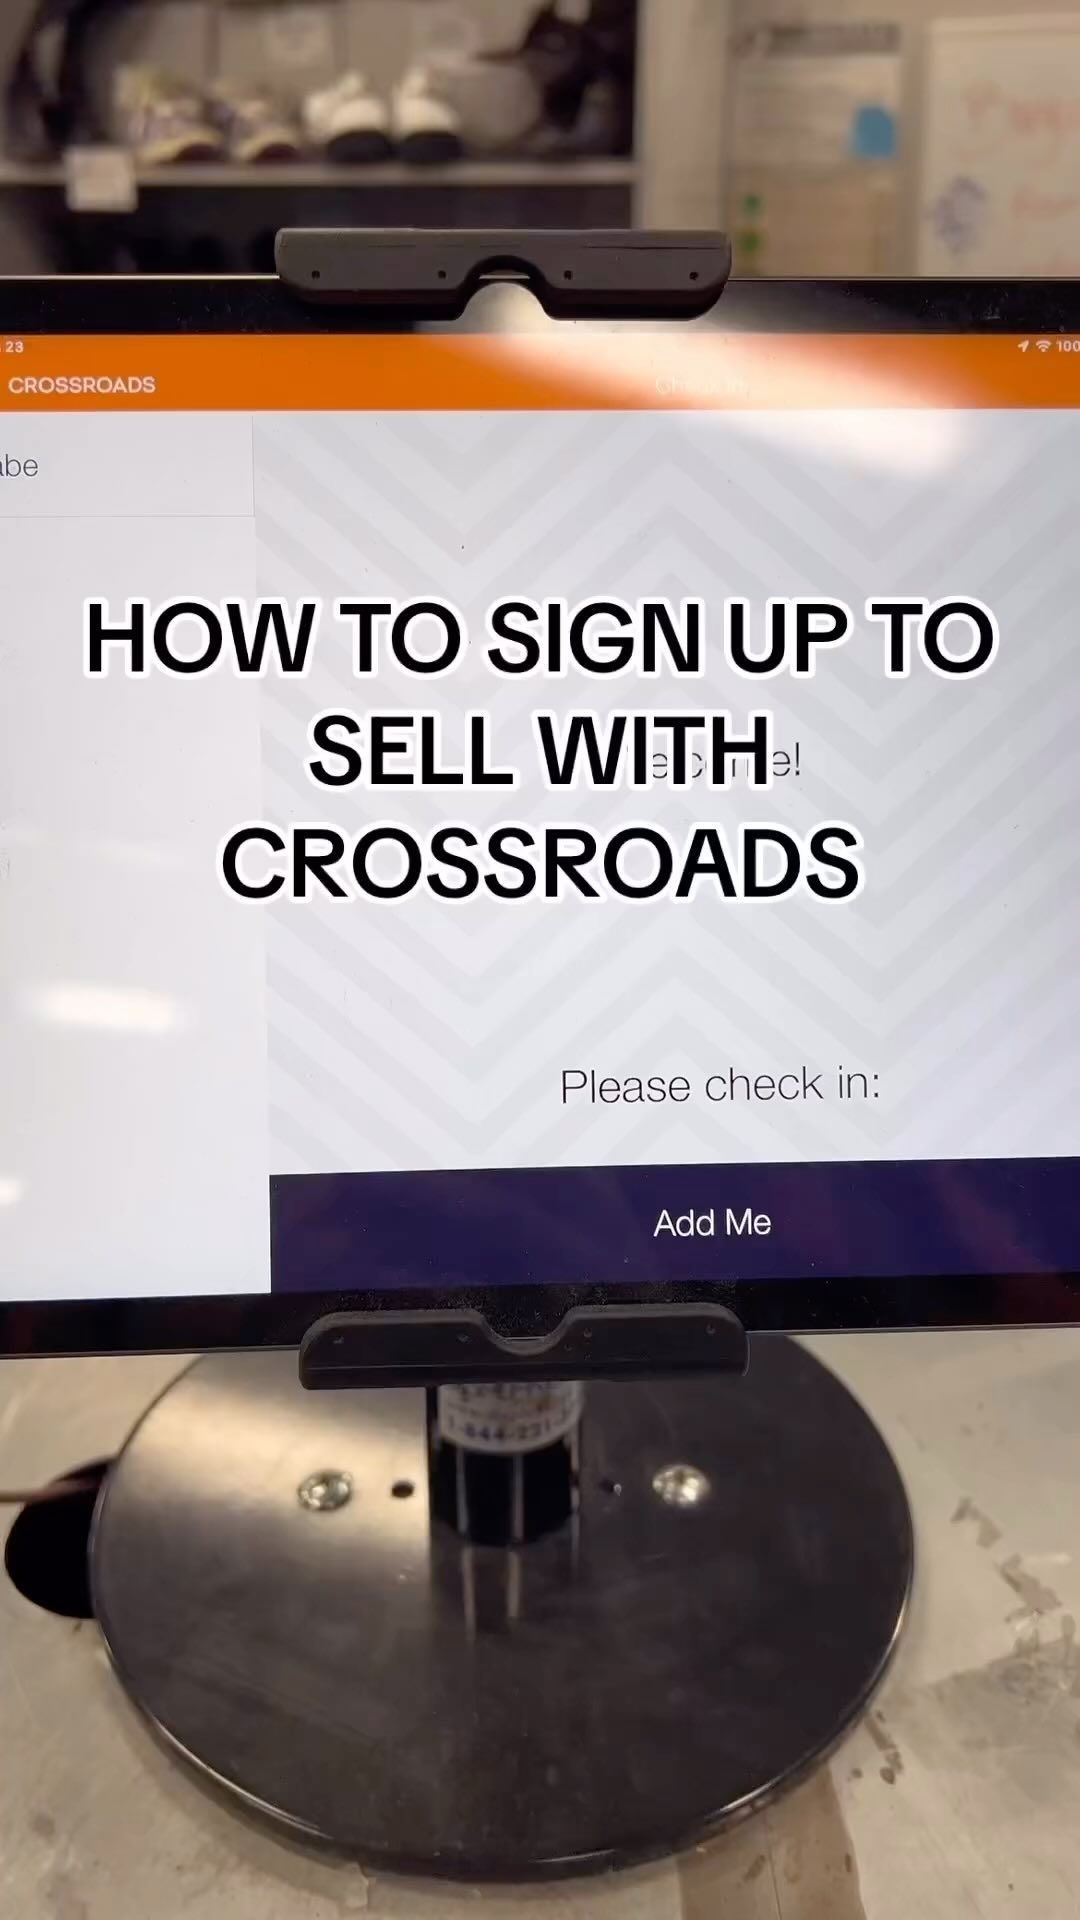 The first step of selling at Crossroads is signing into our waitlist! Follow along to learn how to sign into the waitlist in store or through our Waitlist App. 🙌📱

Reminder, wait times can vary due to the varying amount of items brought in by Sellers. We try our best to get through items in a timely manner and always appreciate your patience. 

🎥: @crossroads_soca 

#crossroadstrading #crossroadsfinds #crossroadsstore #fashionfinds #buyselltrade #style #thriftfinds #consignment #shopping #womensfashion #mensfashion #fashionblogger #ootd #fashion #thrift #sustainablefashion #secondhandfirst #shopthrift #consignment #thrifted